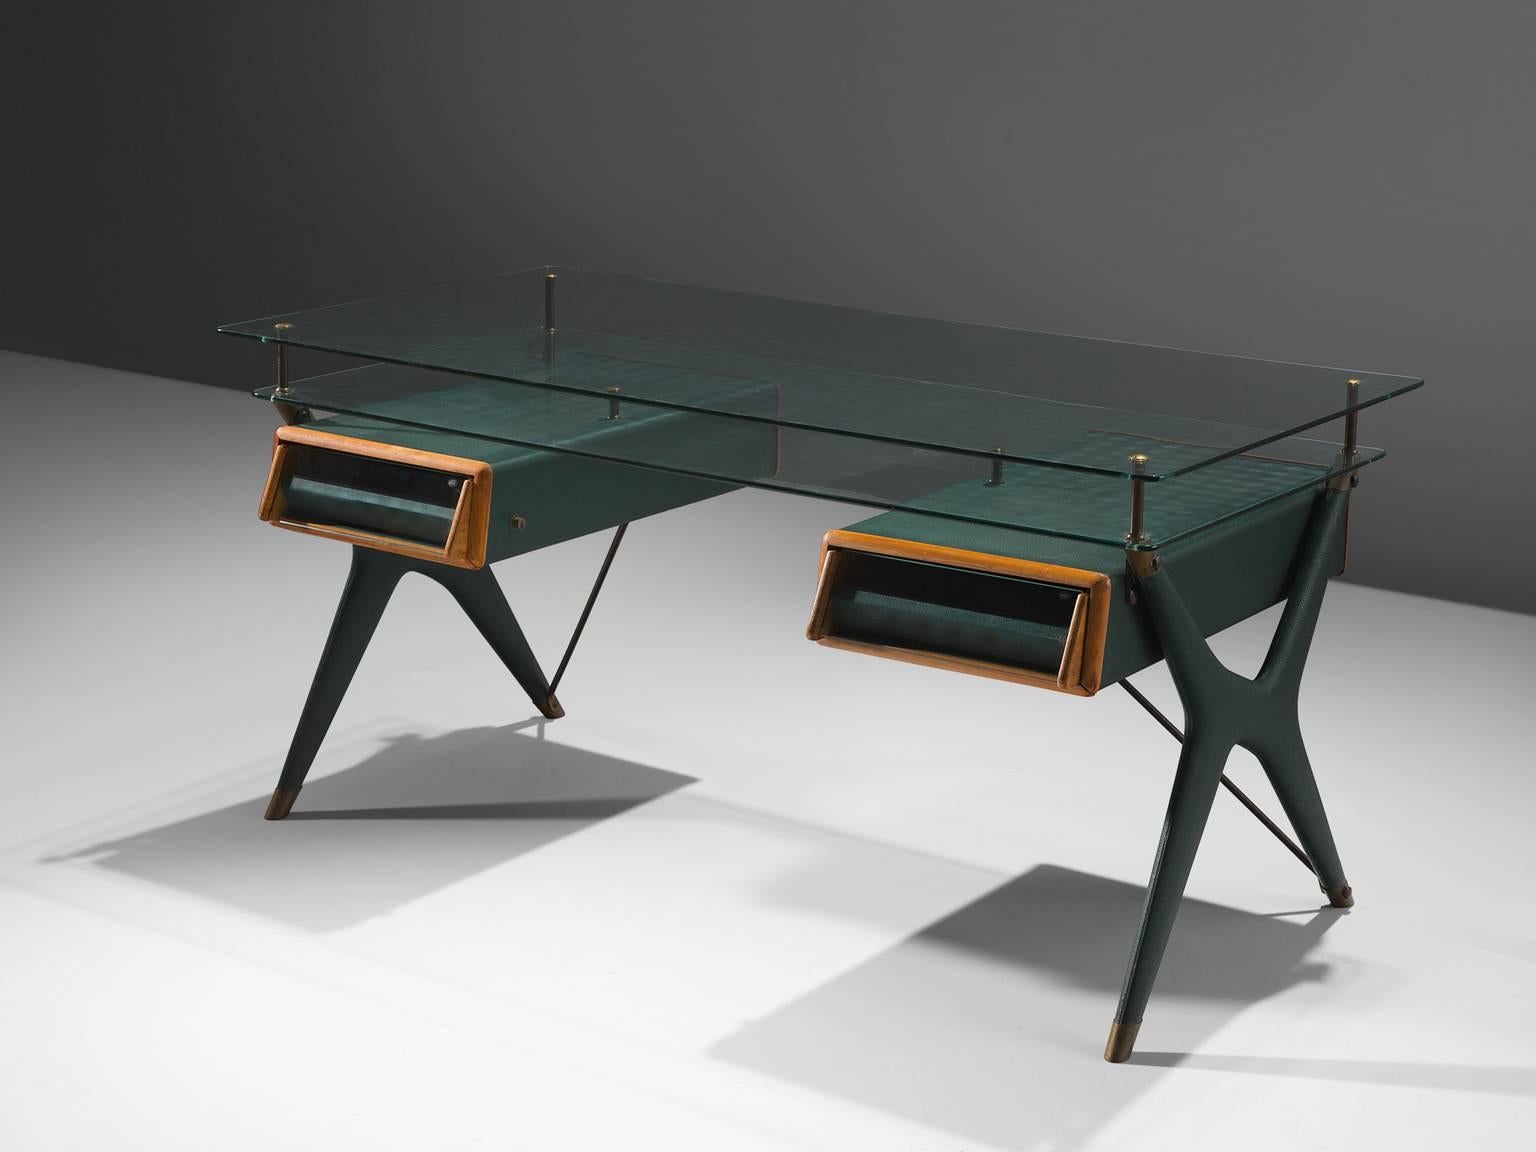 Silvio Berrone for Vitrex, desk in walnut, brass, glass and faux leather, Italy, 1950s.

This elegant desk is designed by the architect Silvio Berrone. He originally designed this desk as part of a larger range for Piedmontese coffeemakers company